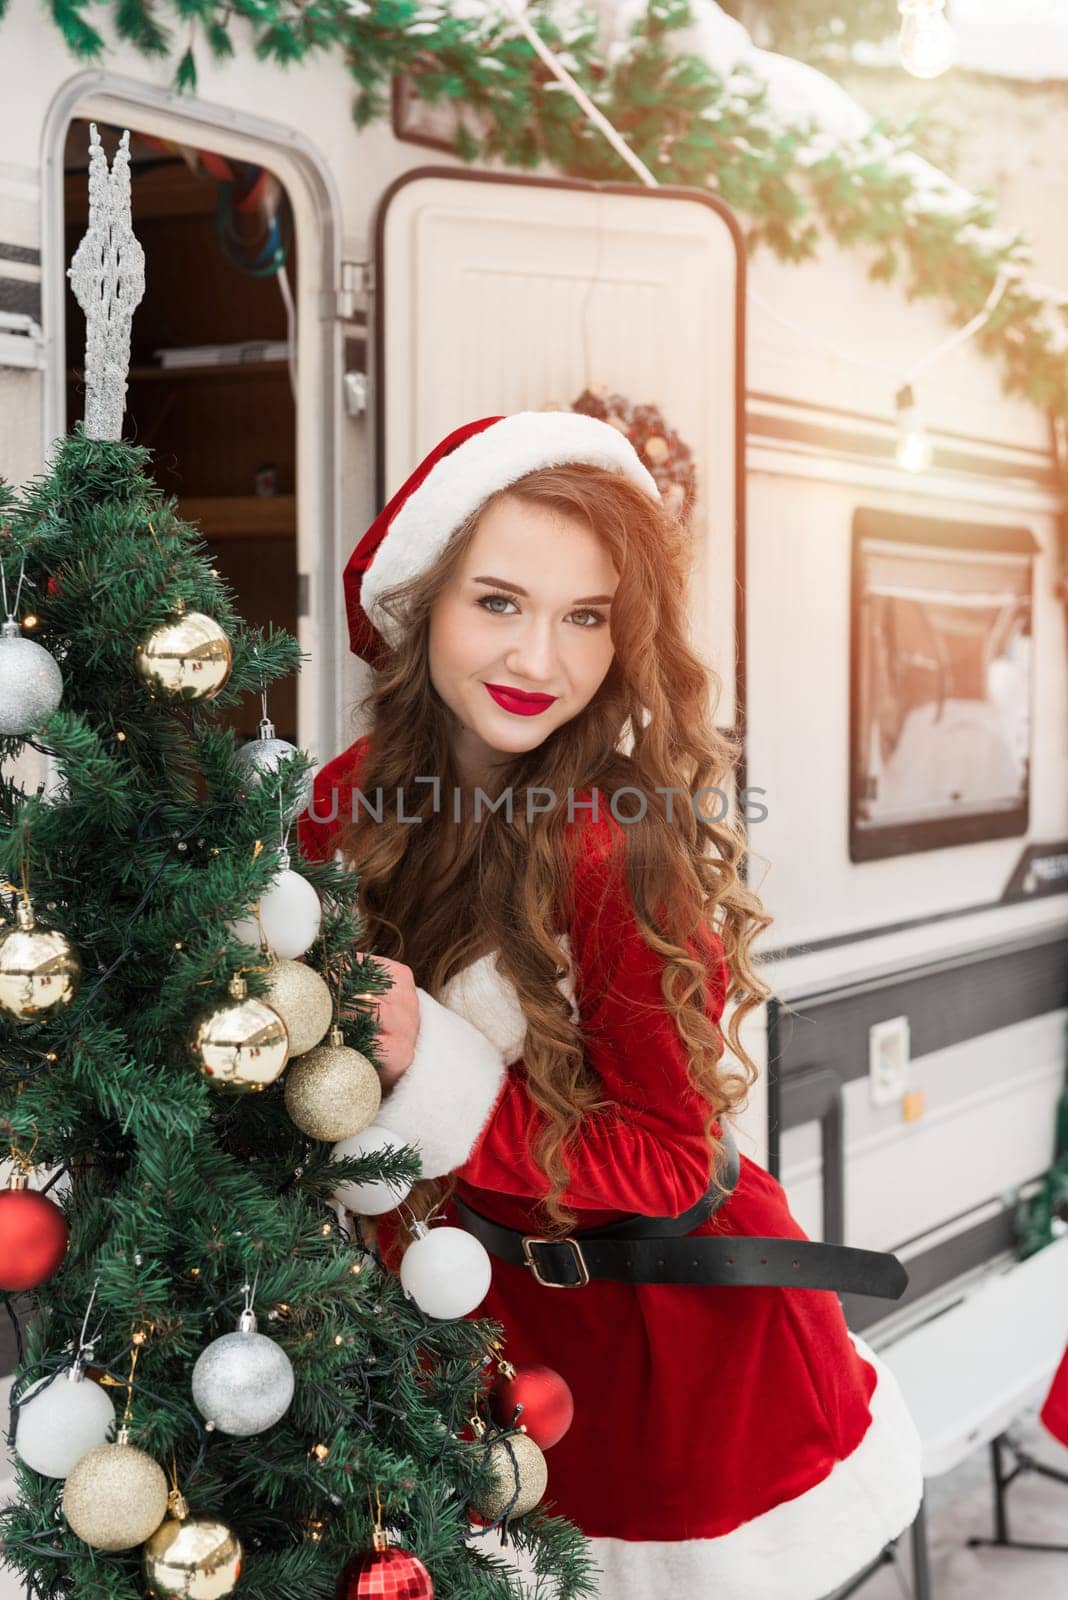 Young woman in santa costume decorates the Christmas tree at winter campsite getting ready for the new year. New year celebration concept